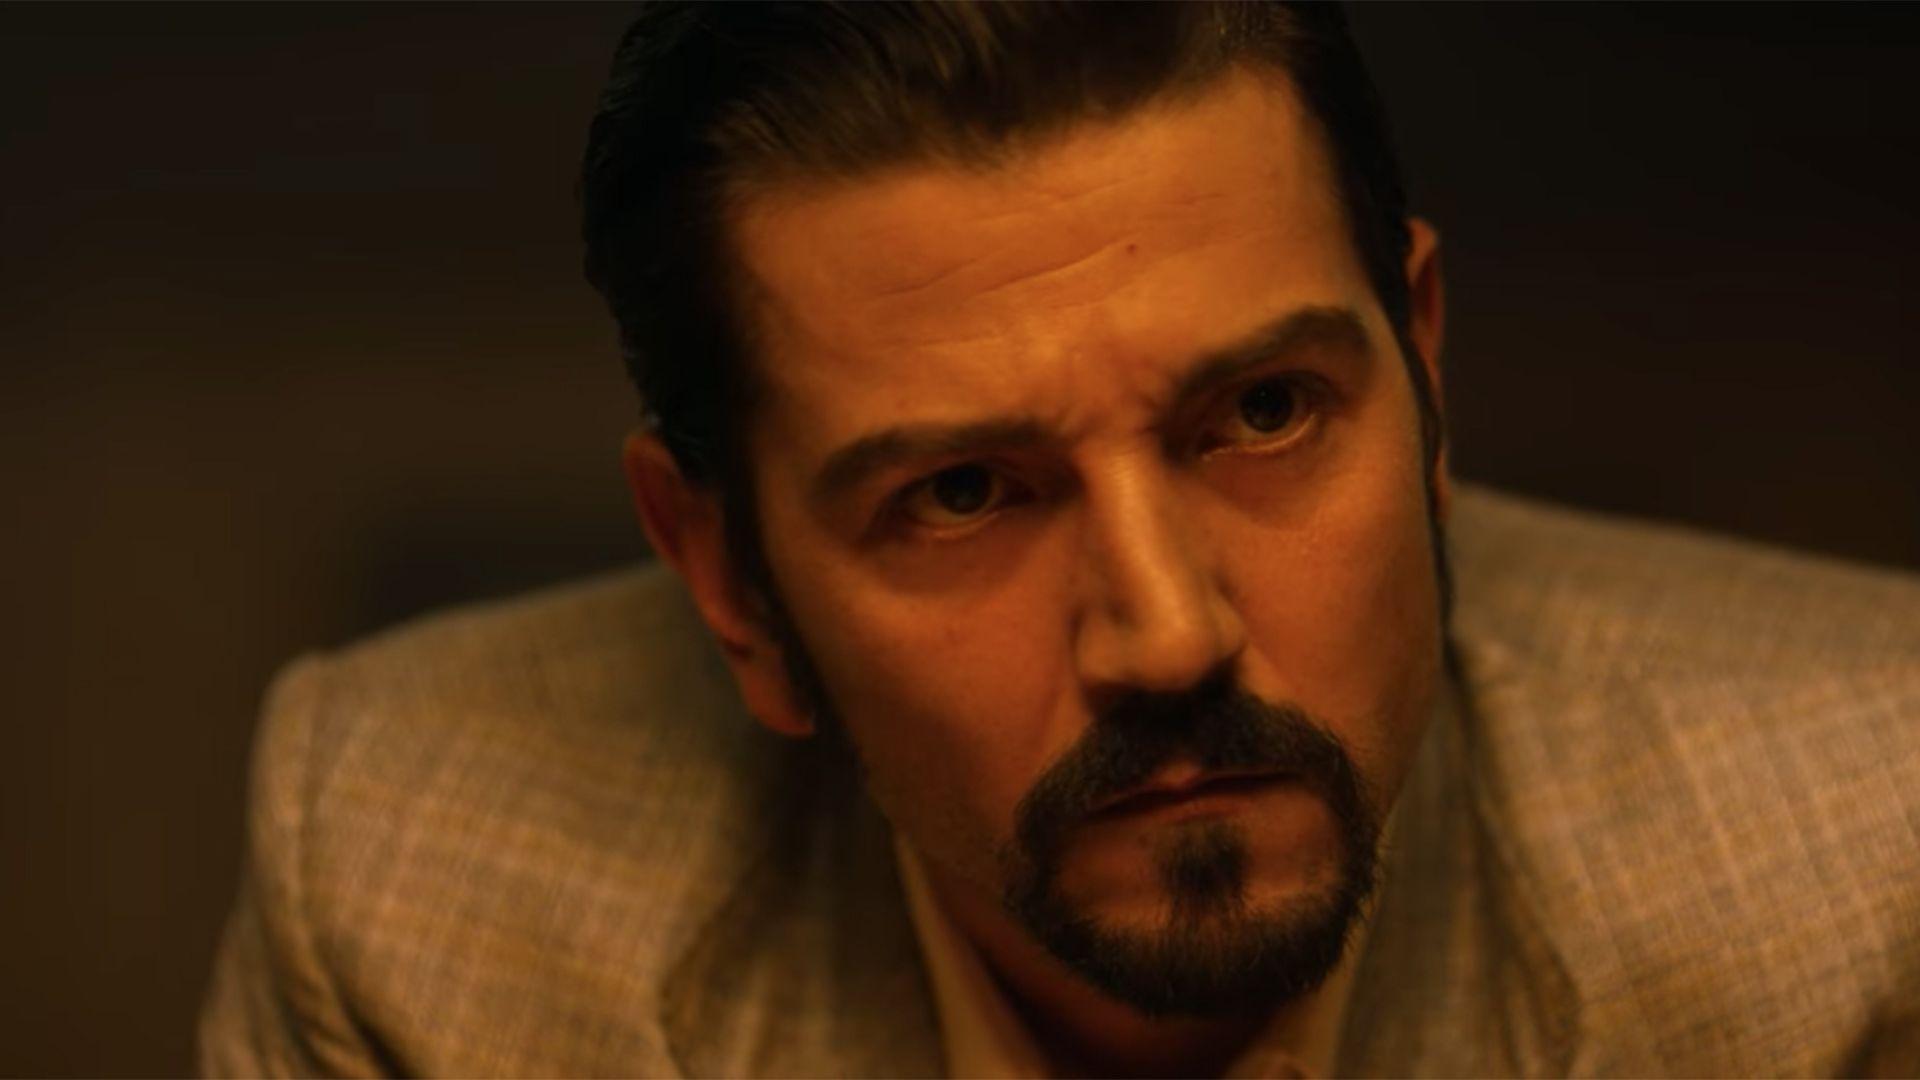 Watch The Trailer for “Narcos: Mexico” With Diego Luna and Michael